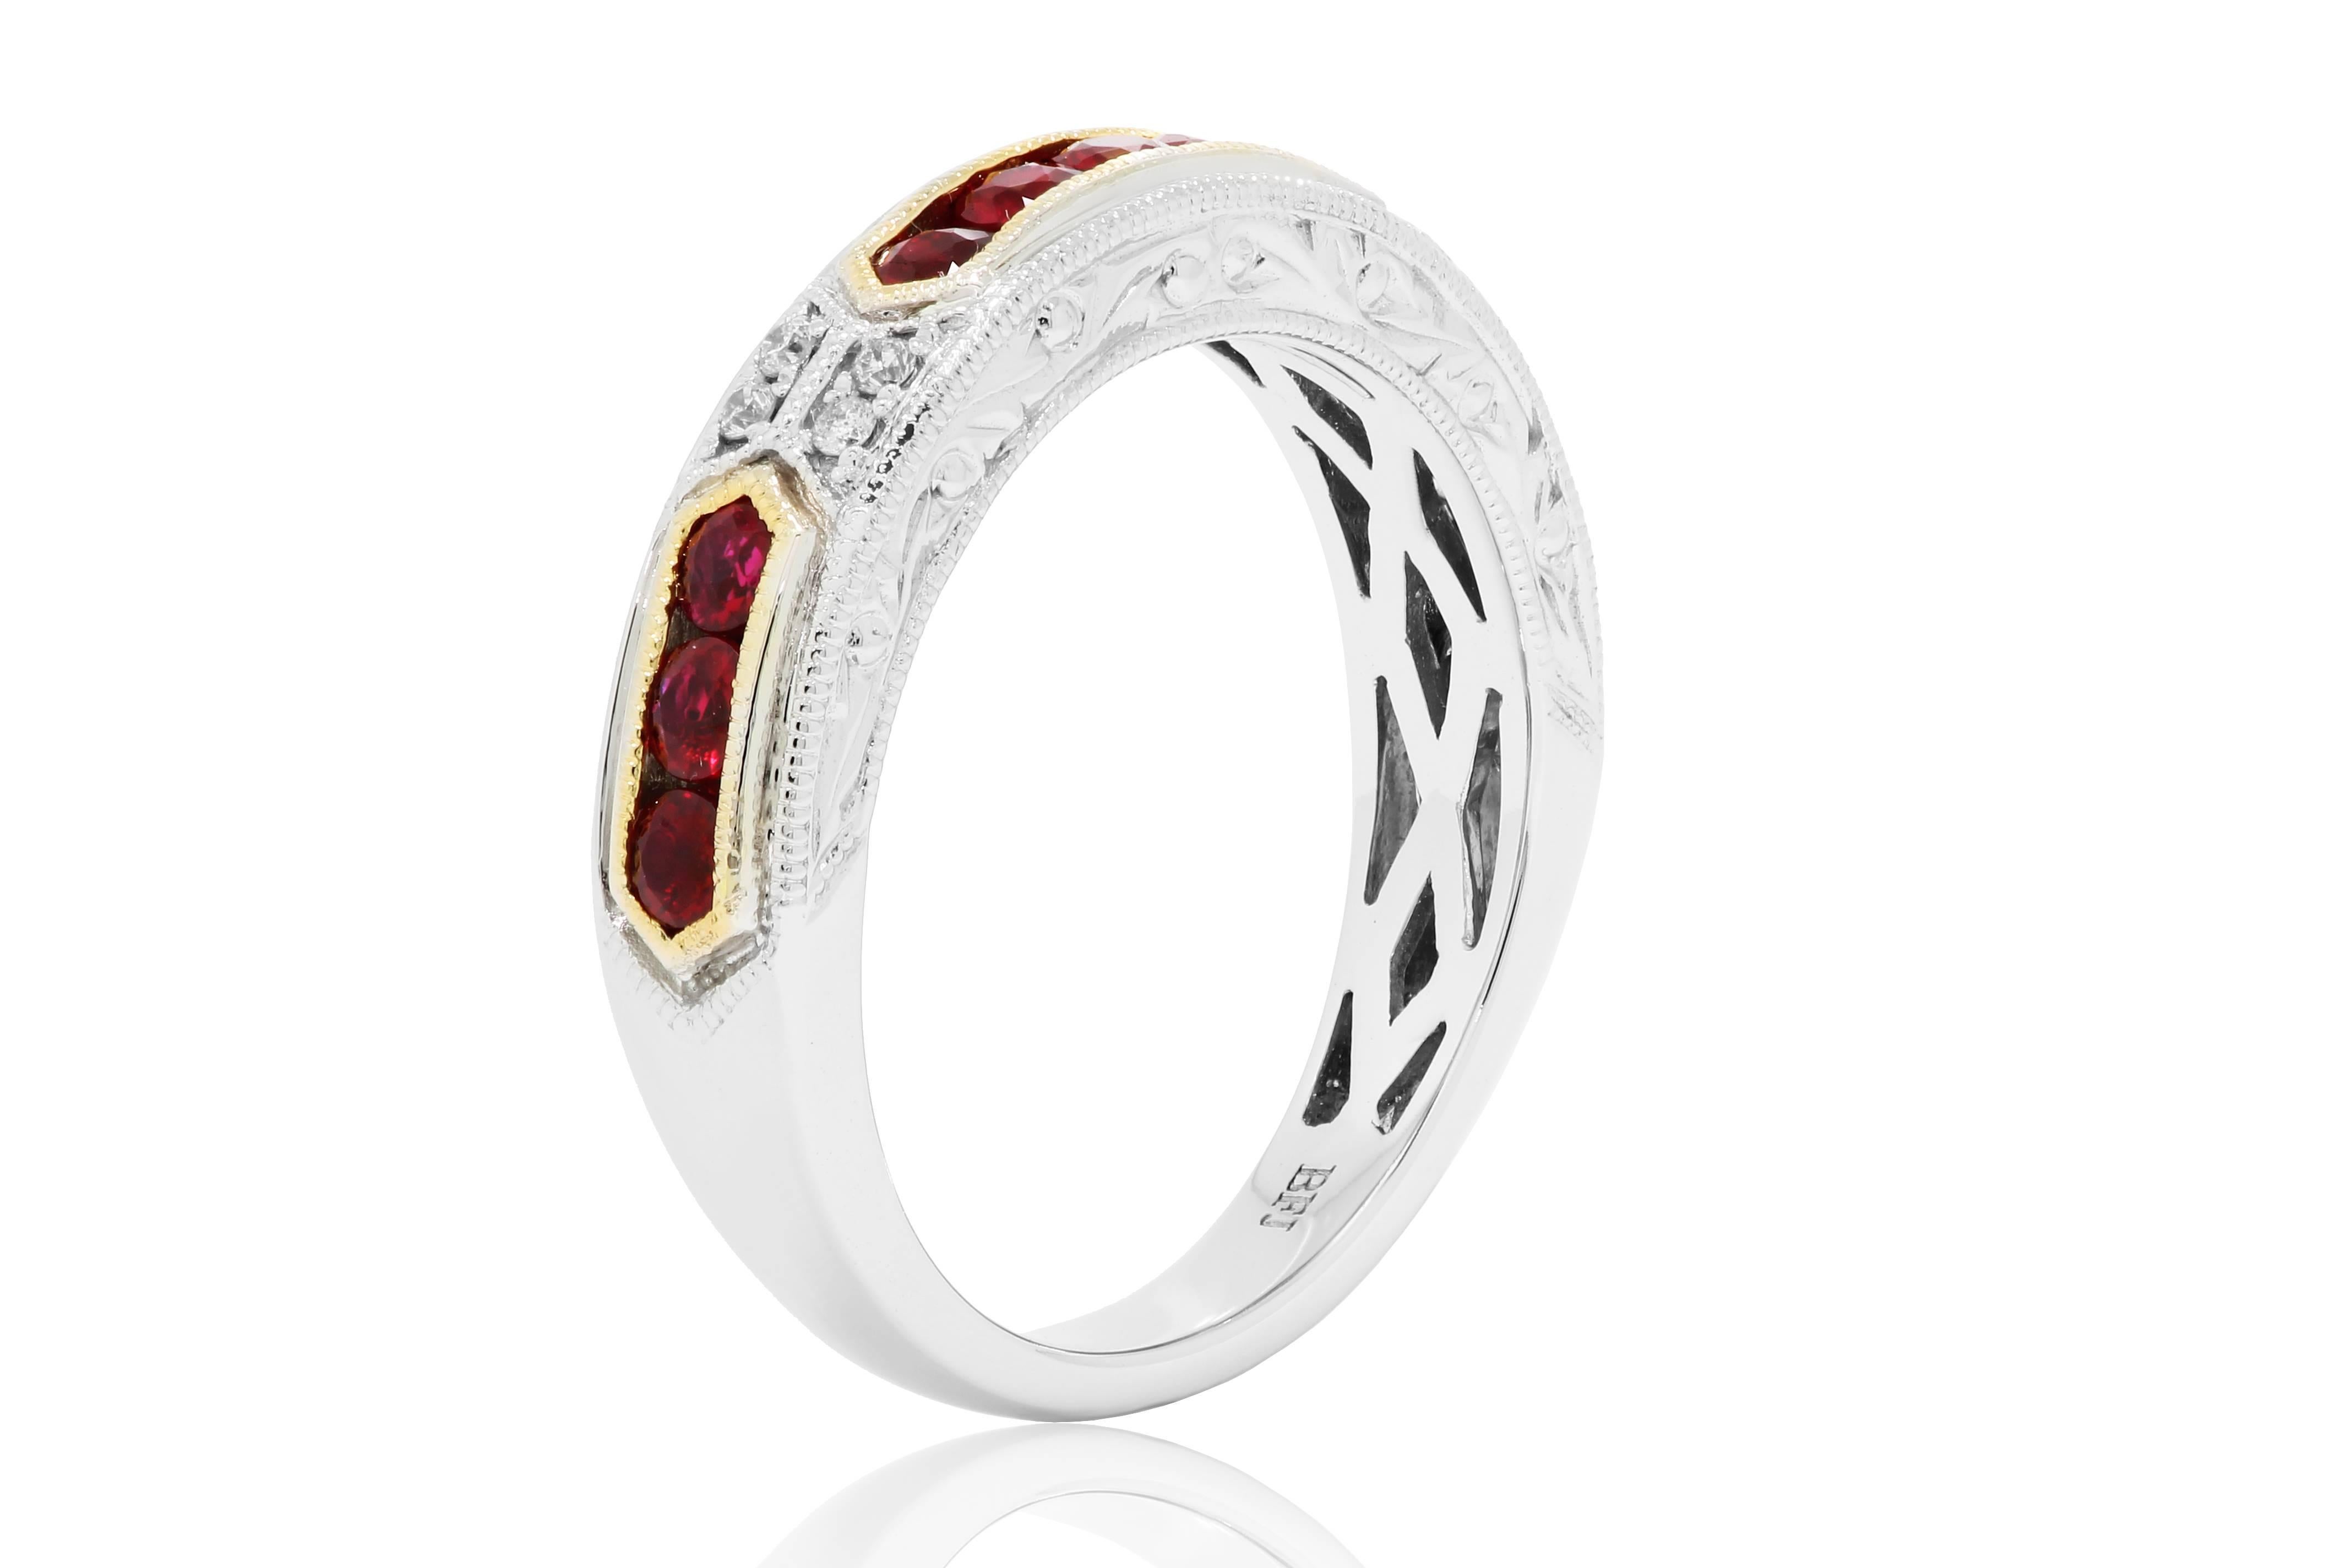 11 Ruby Round 0.80 carat , White Diamond Round 0.05 Carat in a beautiful engraving and filigree work 14K White and Yellow Gold band ring.